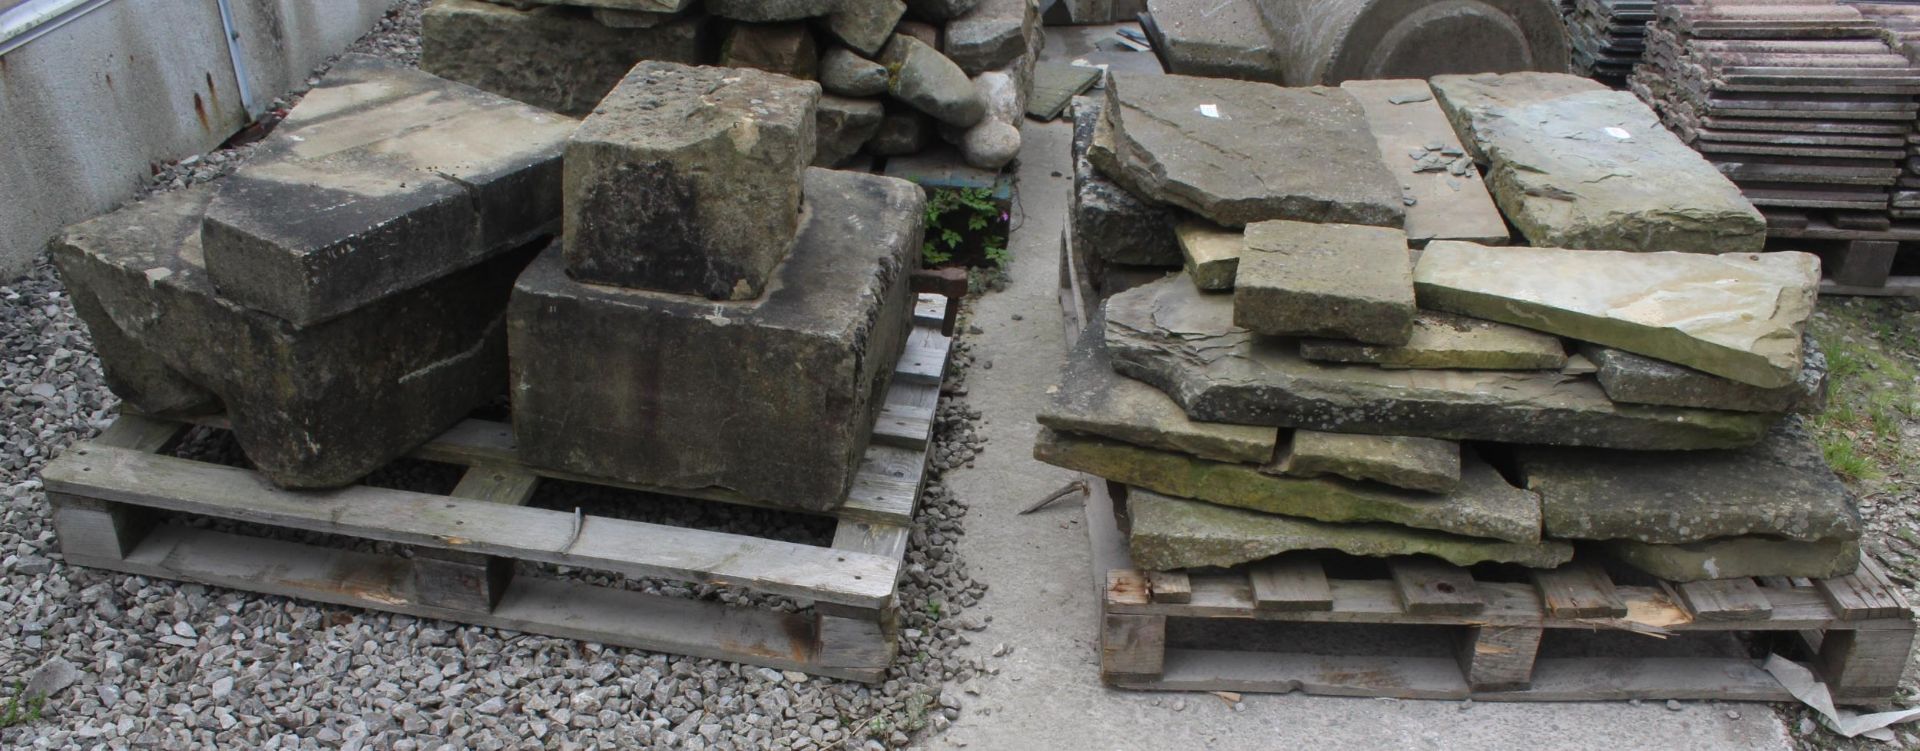 PALLET BOX OF YORK AND SAND STONE NO VAT